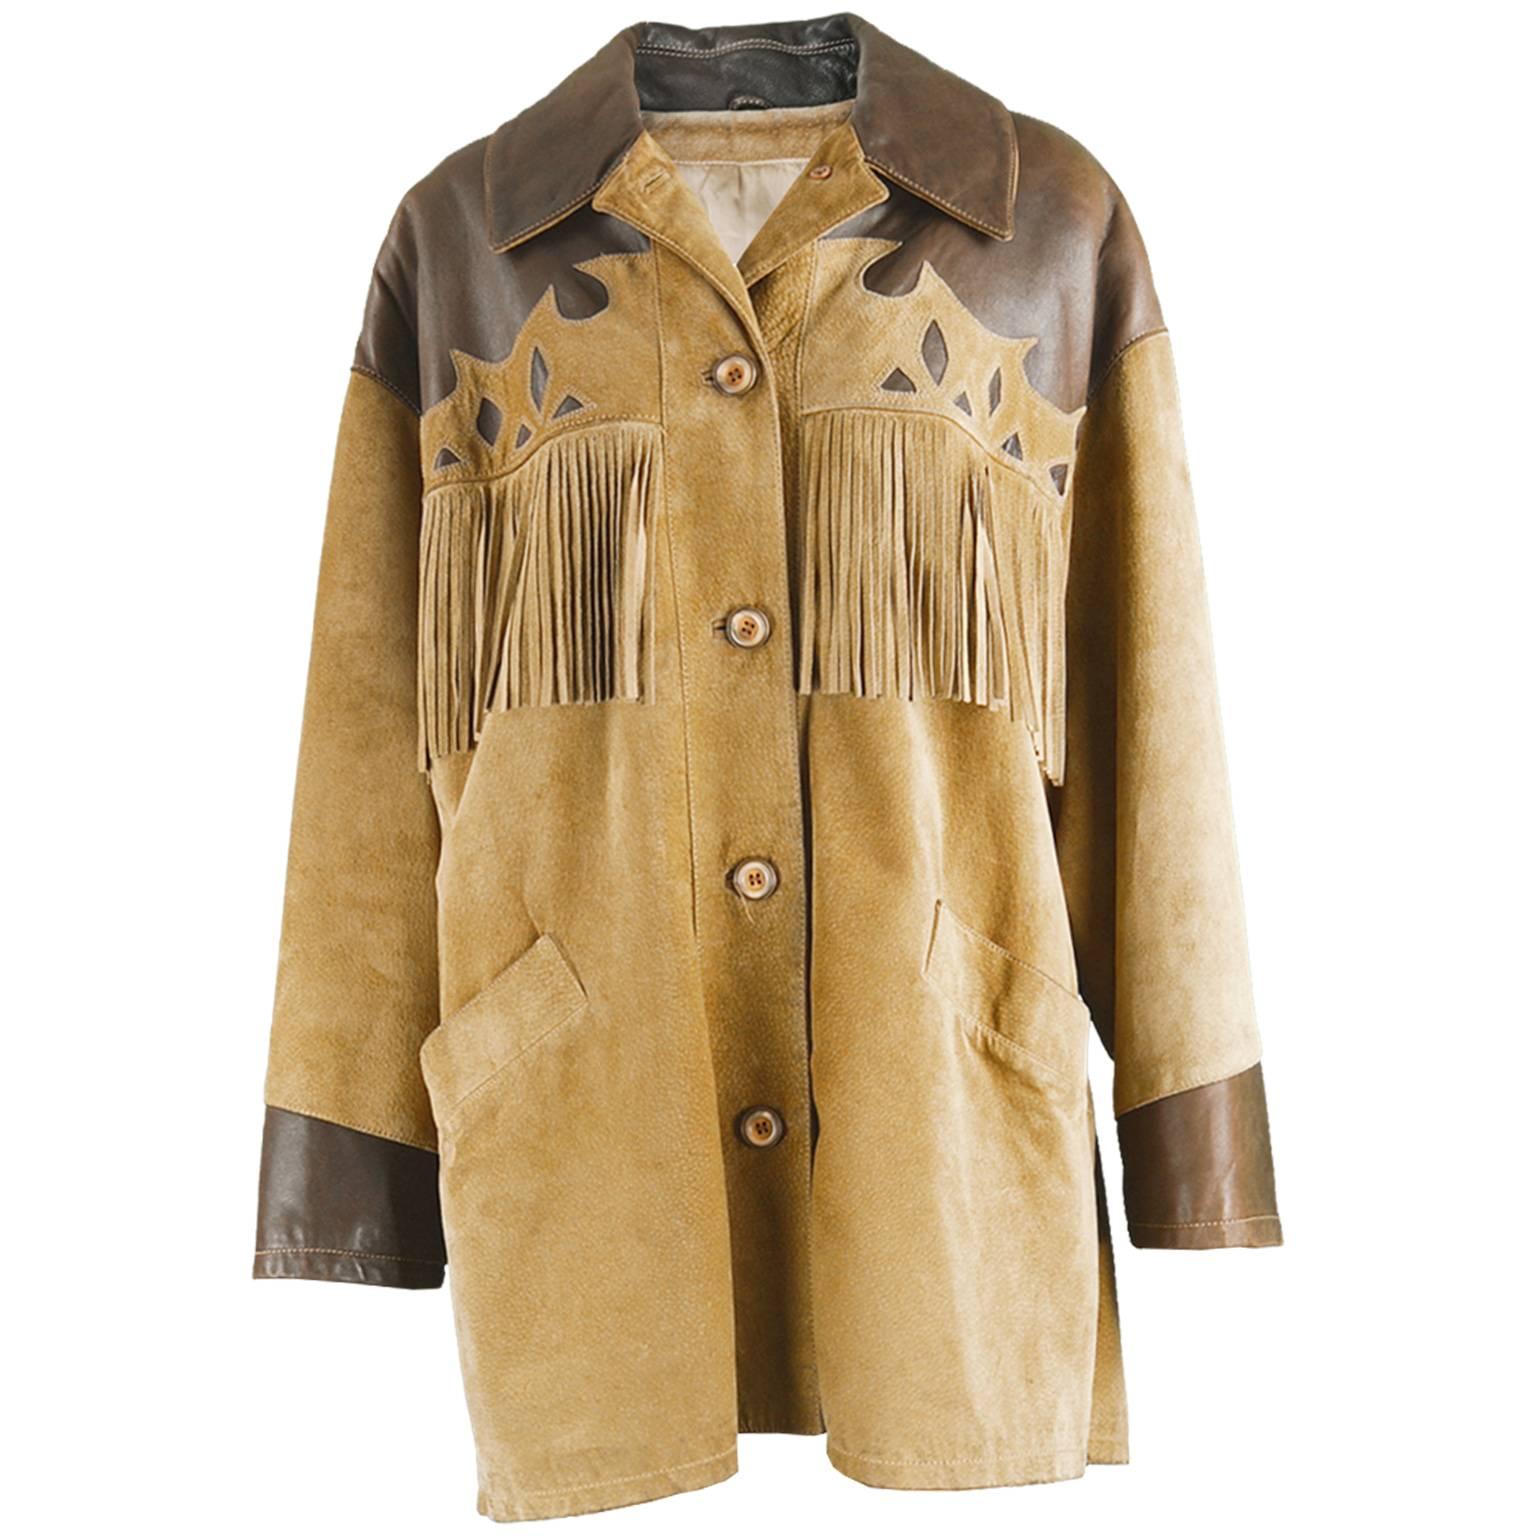 Byblos Italian Leather & Suede Oversized Western Style Fringed Jacket, 1980s For Sale